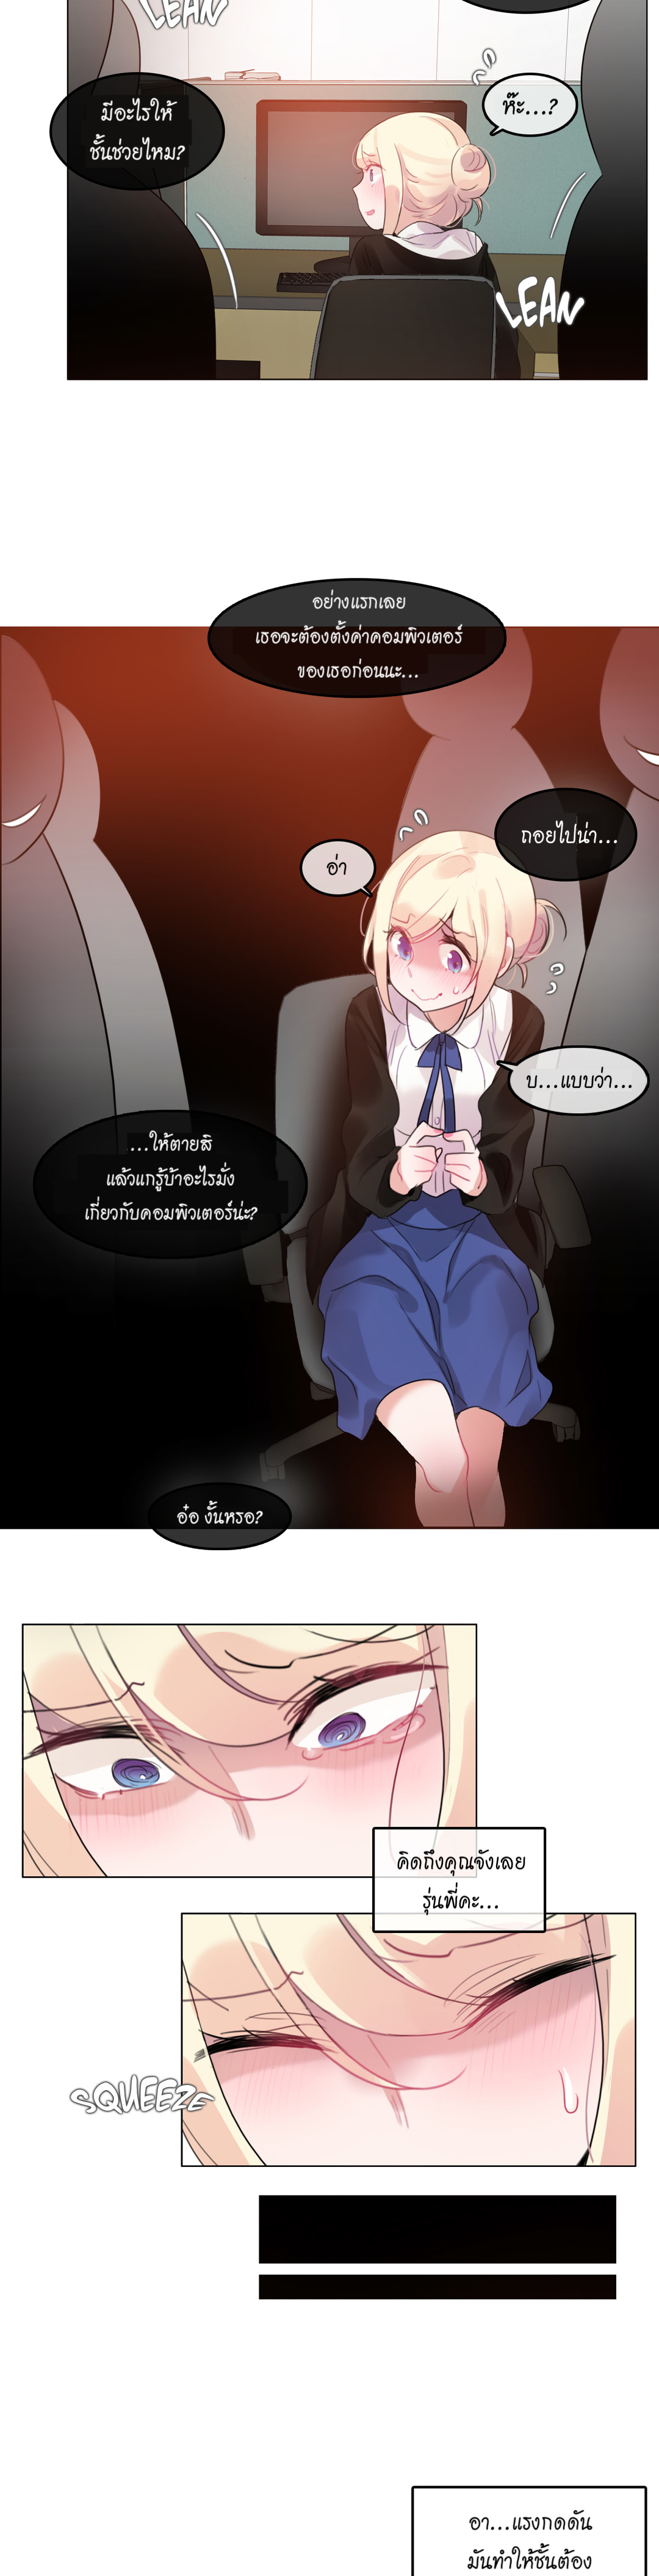 A Pervert’s Daily Life49 (9)